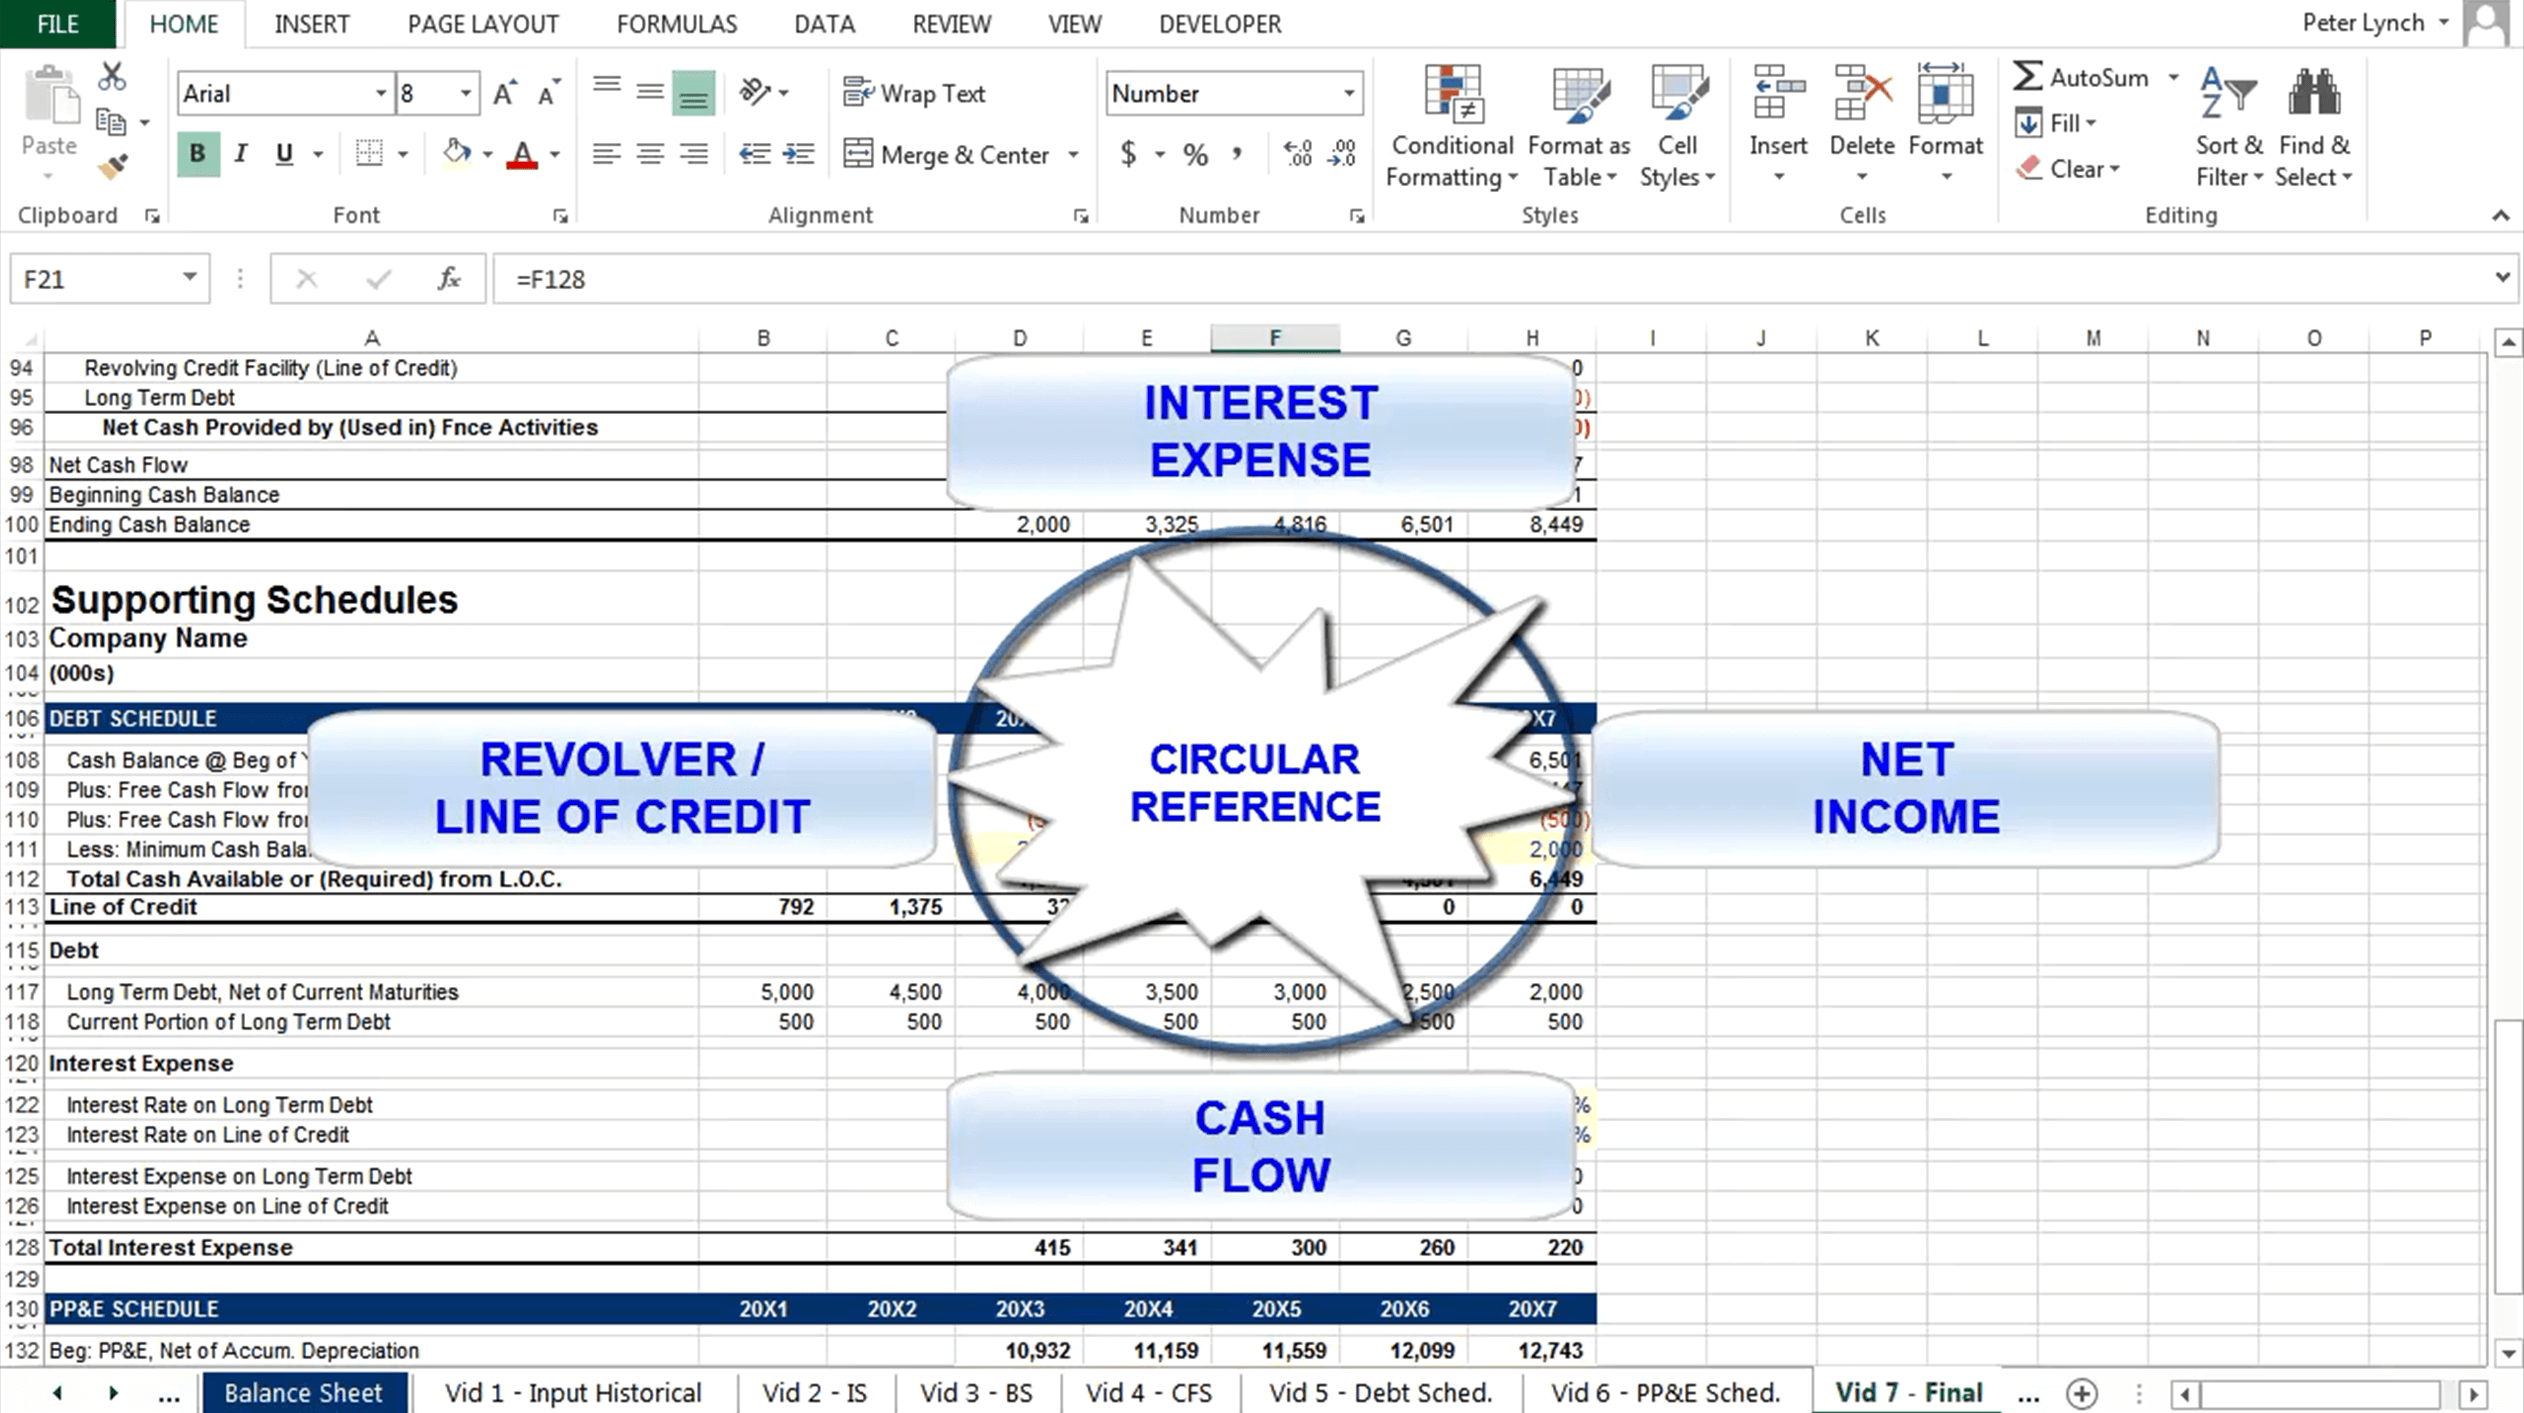 Circular Reference in a Financial Model